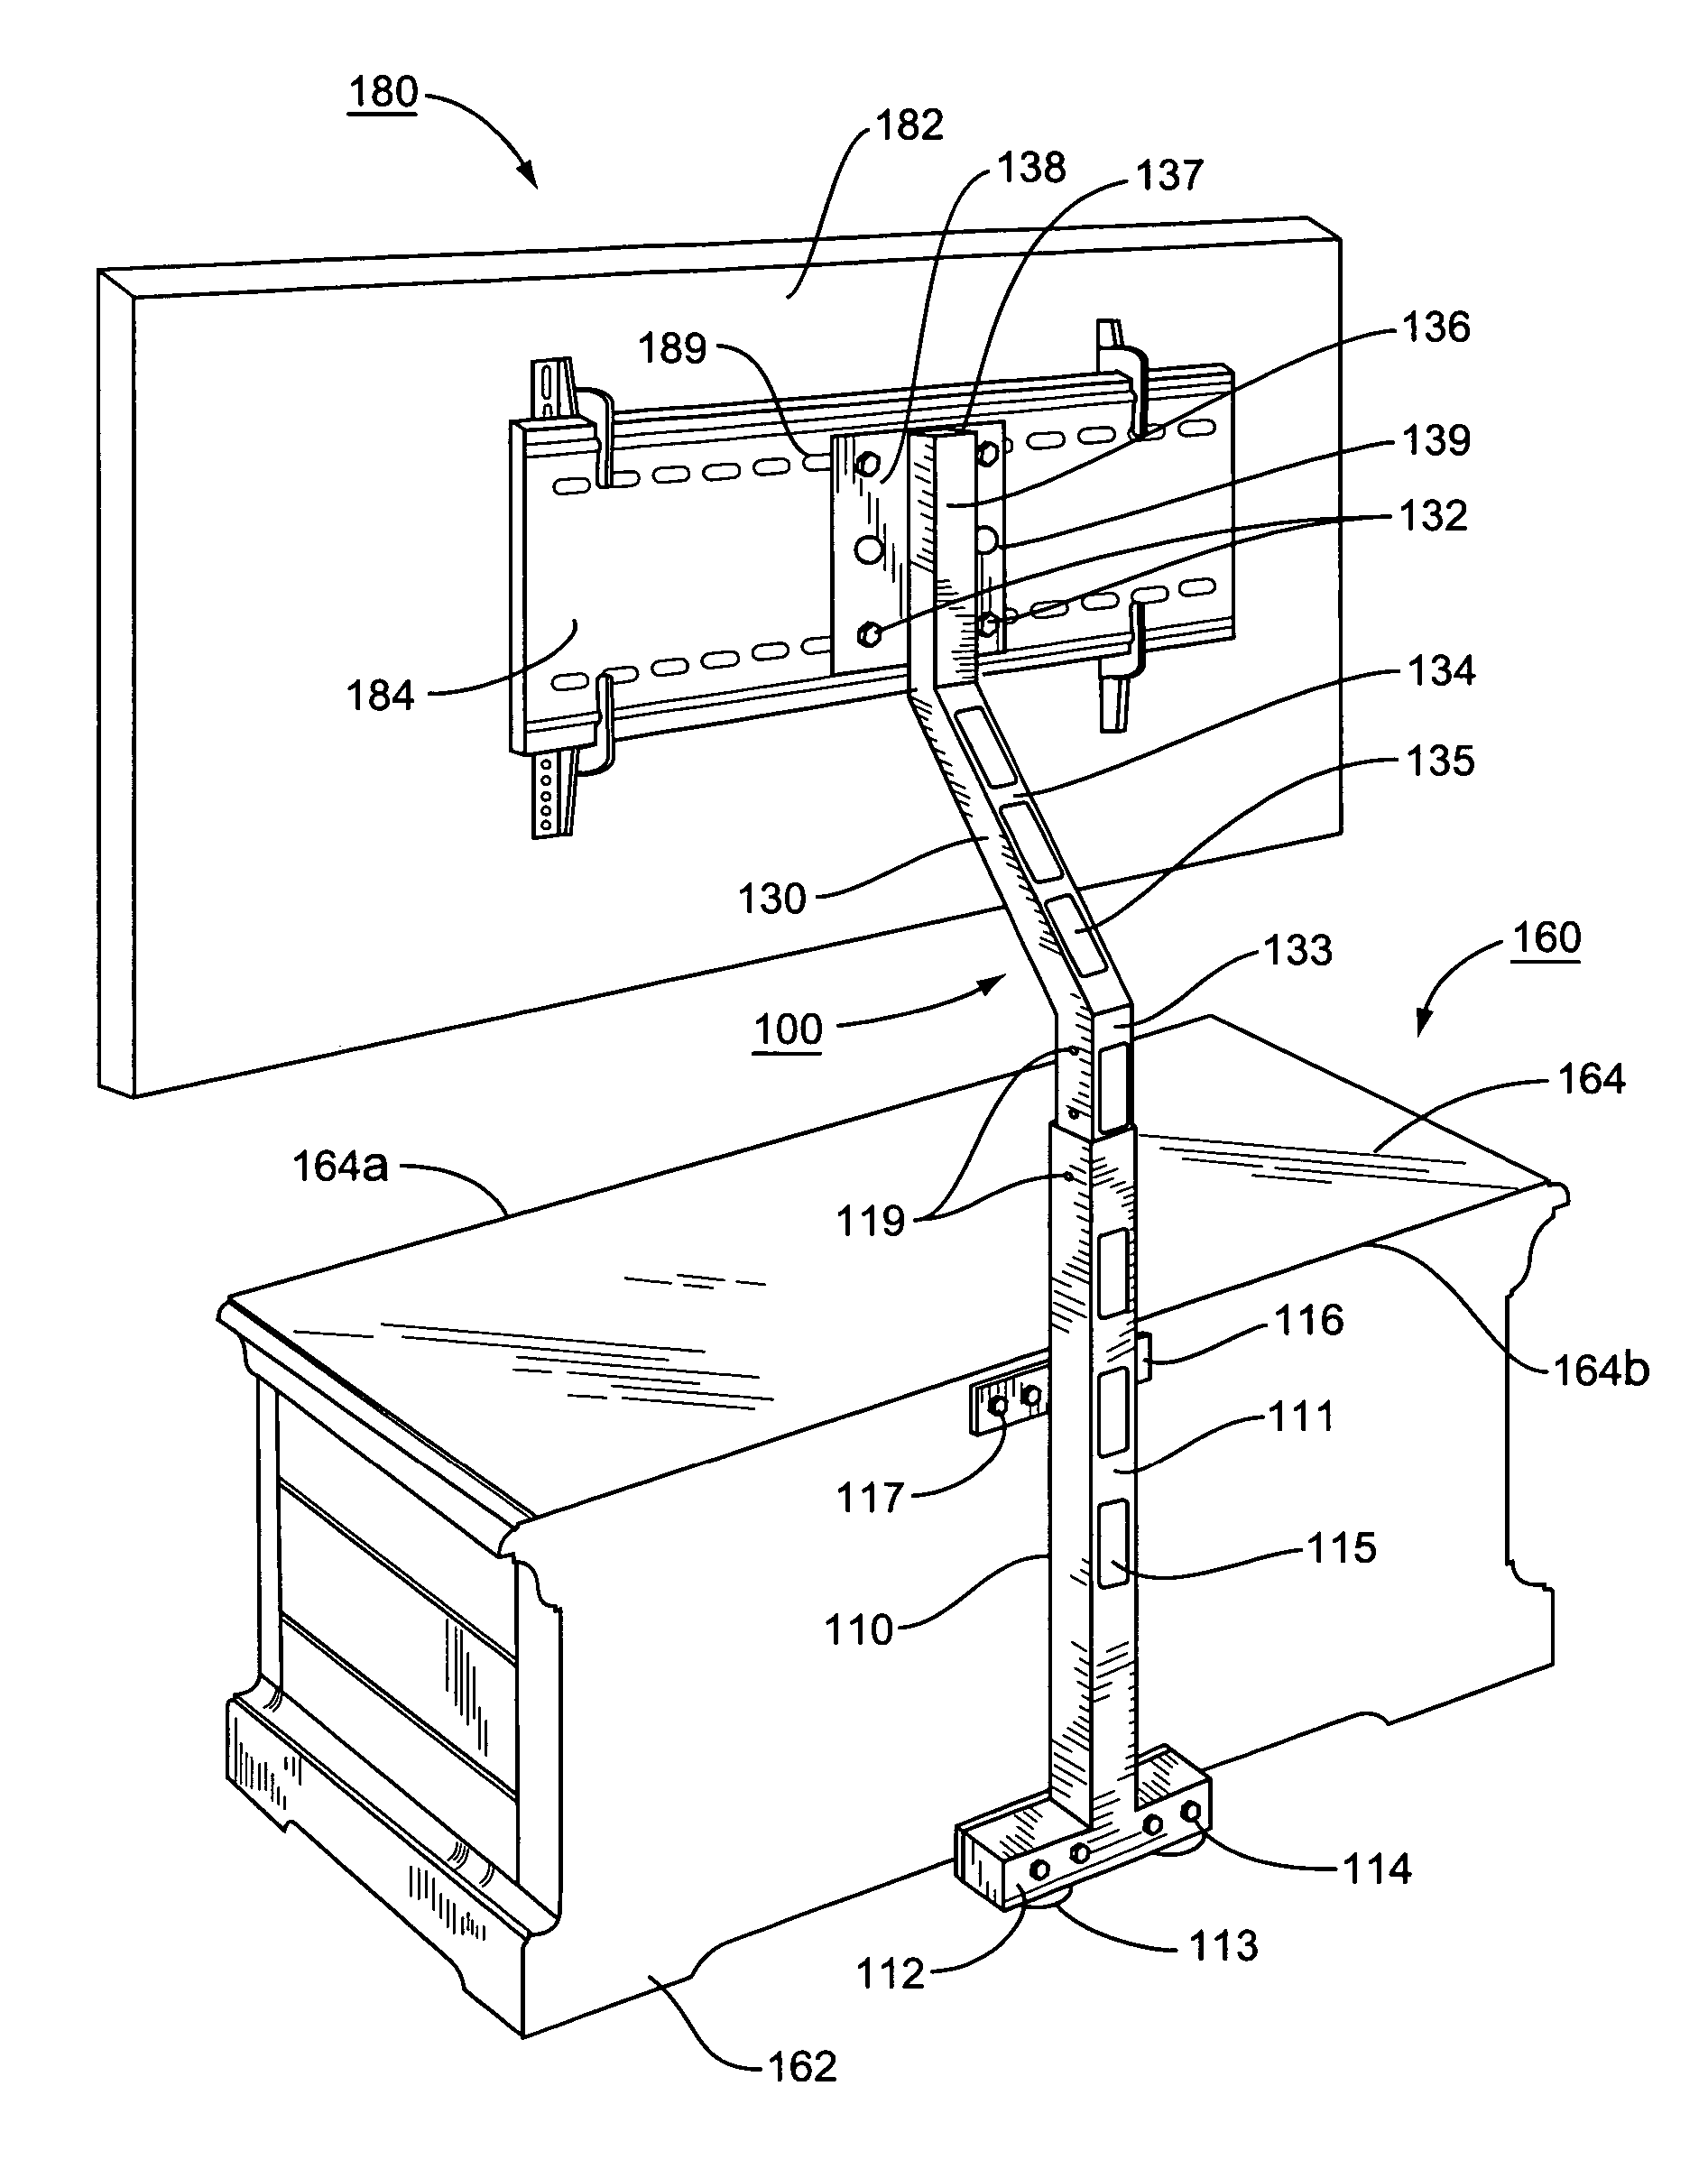 Flat screen television support system